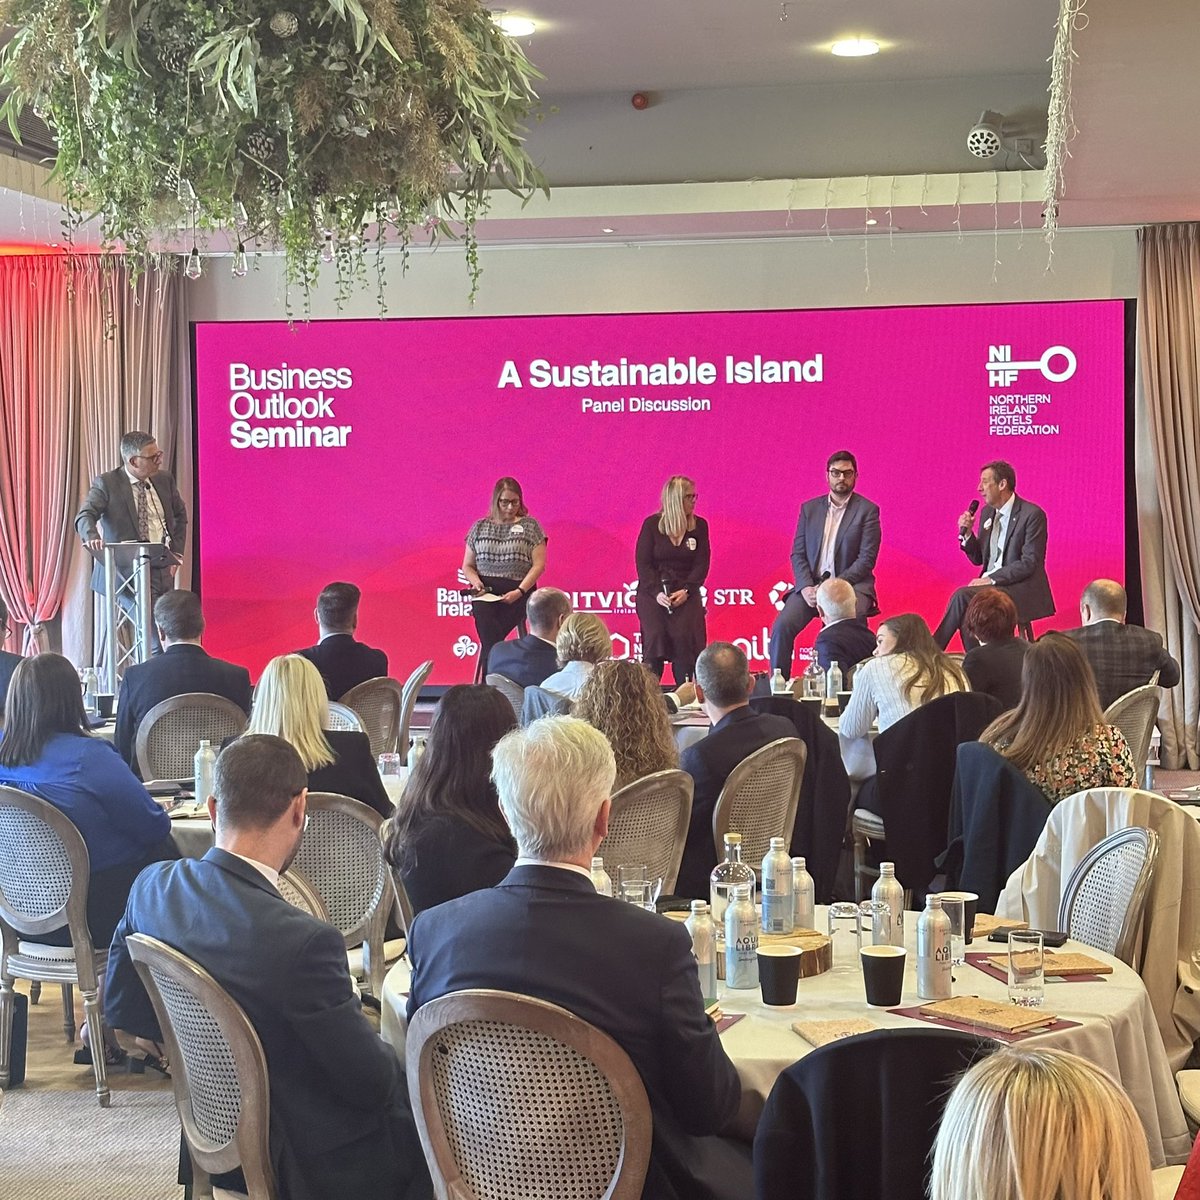 A Sustainable Island Panel Discussion with Jac Callan Visit Belfast, Shane Clarke Tourism Ireland, Alison Leslie Tourism Northern Ireland, Andrew Webb Grant Thornton. #NIHF #BusinessOutlook